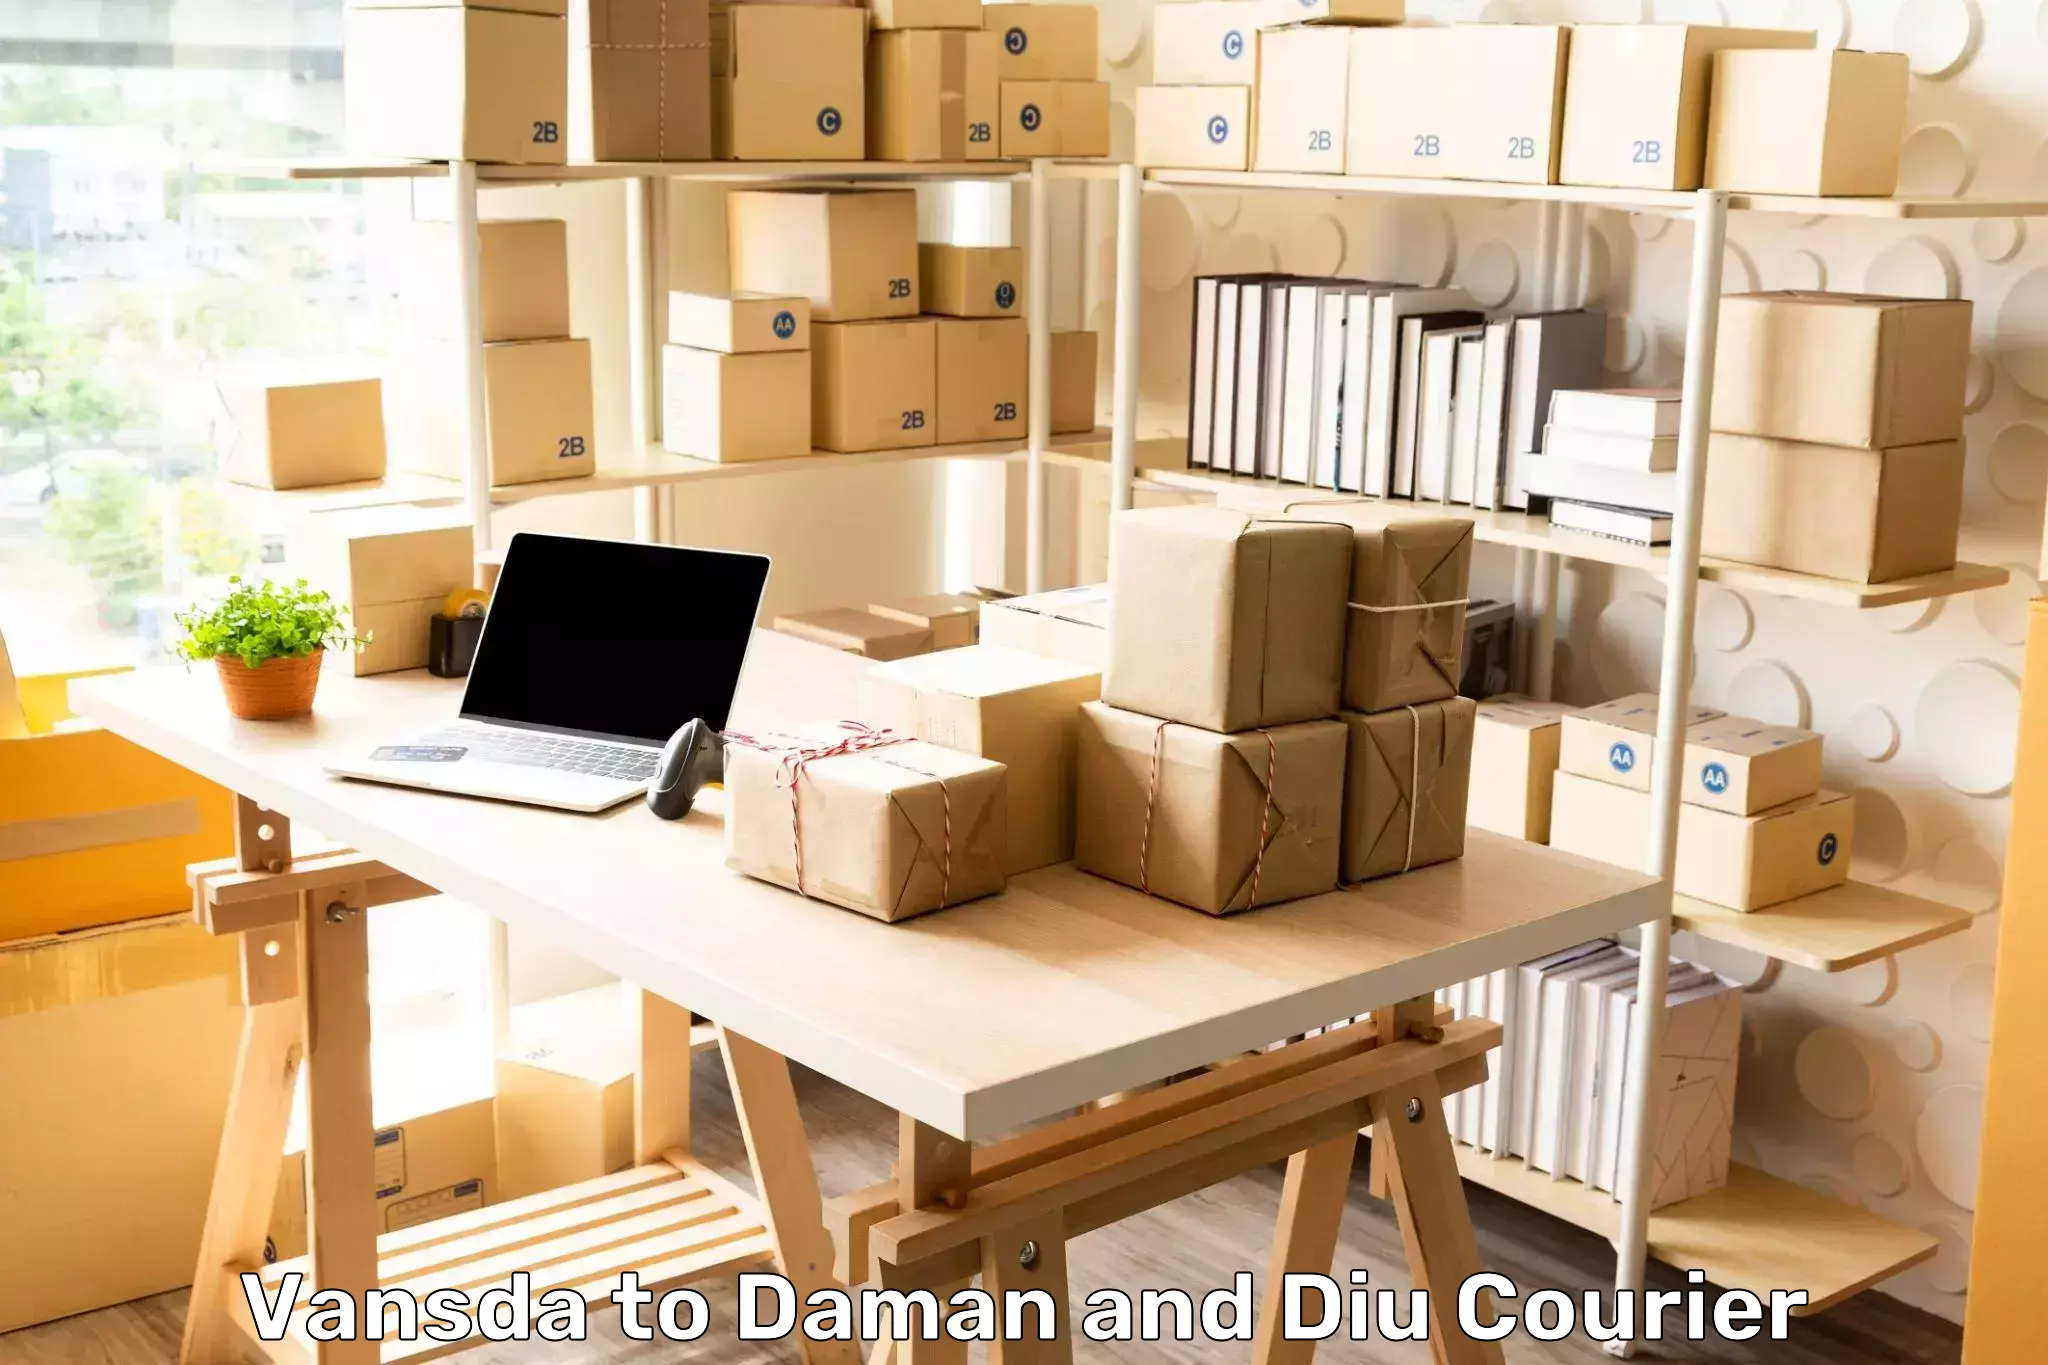 International courier networks Vansda to Daman and Diu